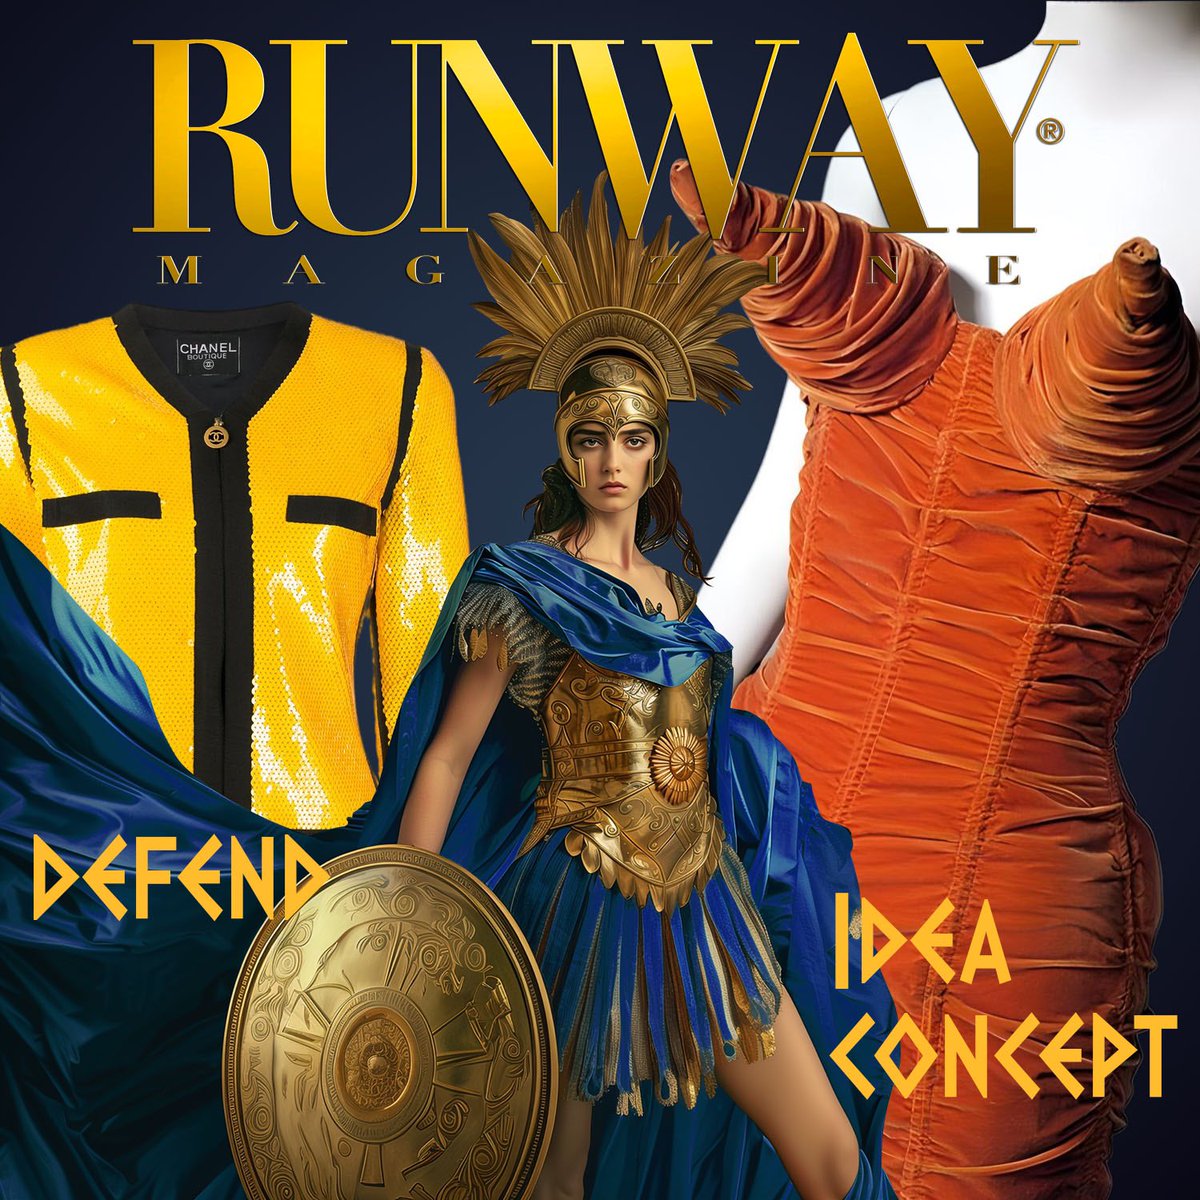 PROTECT AND DEFEND CREDO At @runwaymagazine we fiercely protect designers and their creations from counterfeiting and unauthorized use. Our expertise isn't just in fashion, but to defend and preserve the essence of creativity. #RunwayMagazine